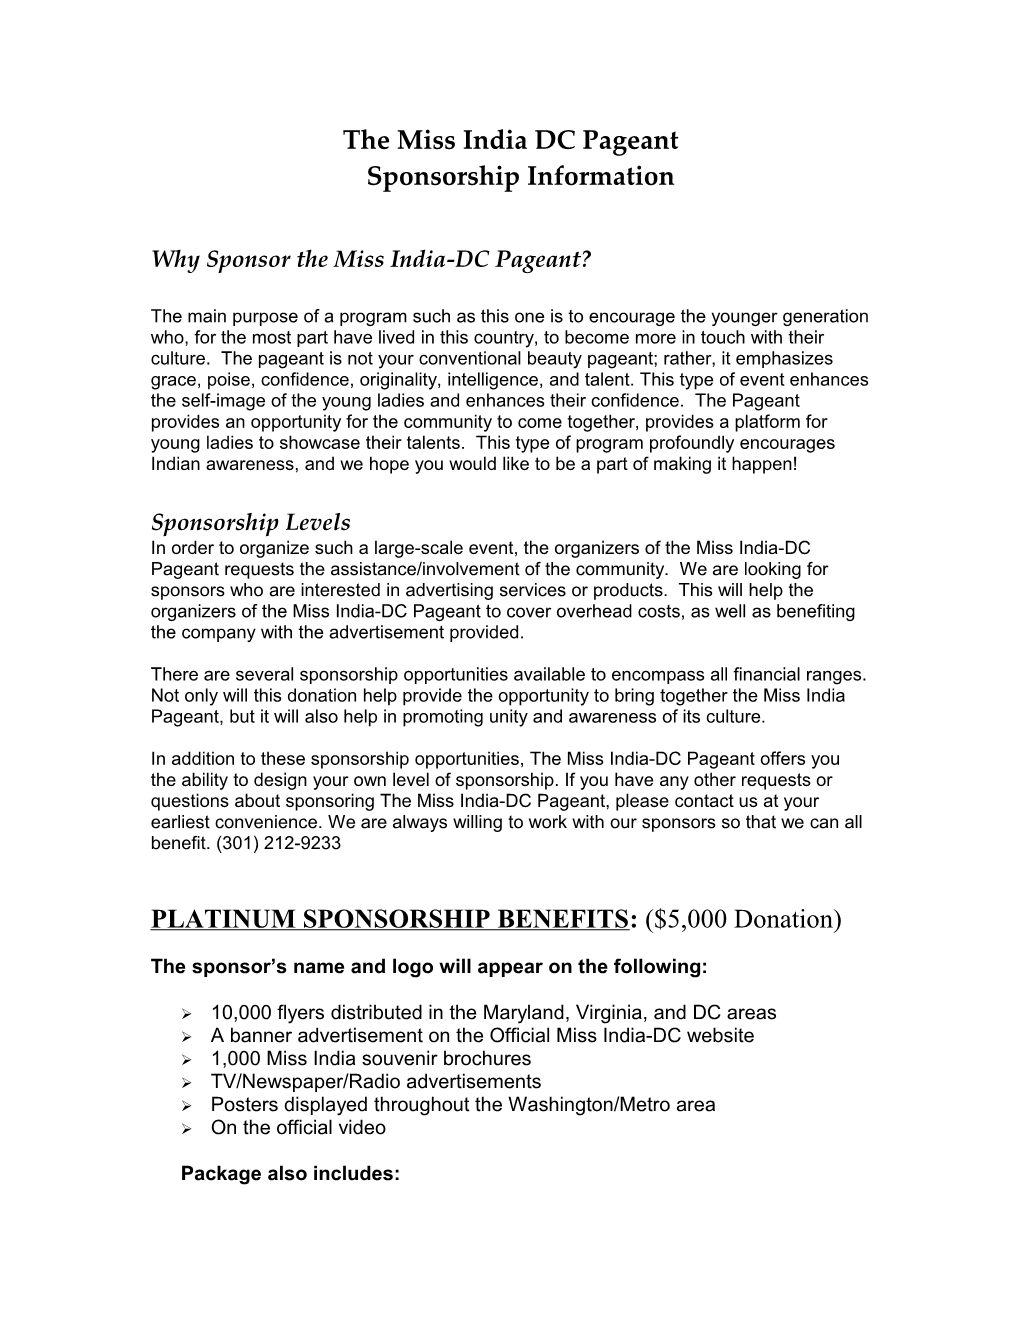 Miss India-DC Pageant Sponsorship Information